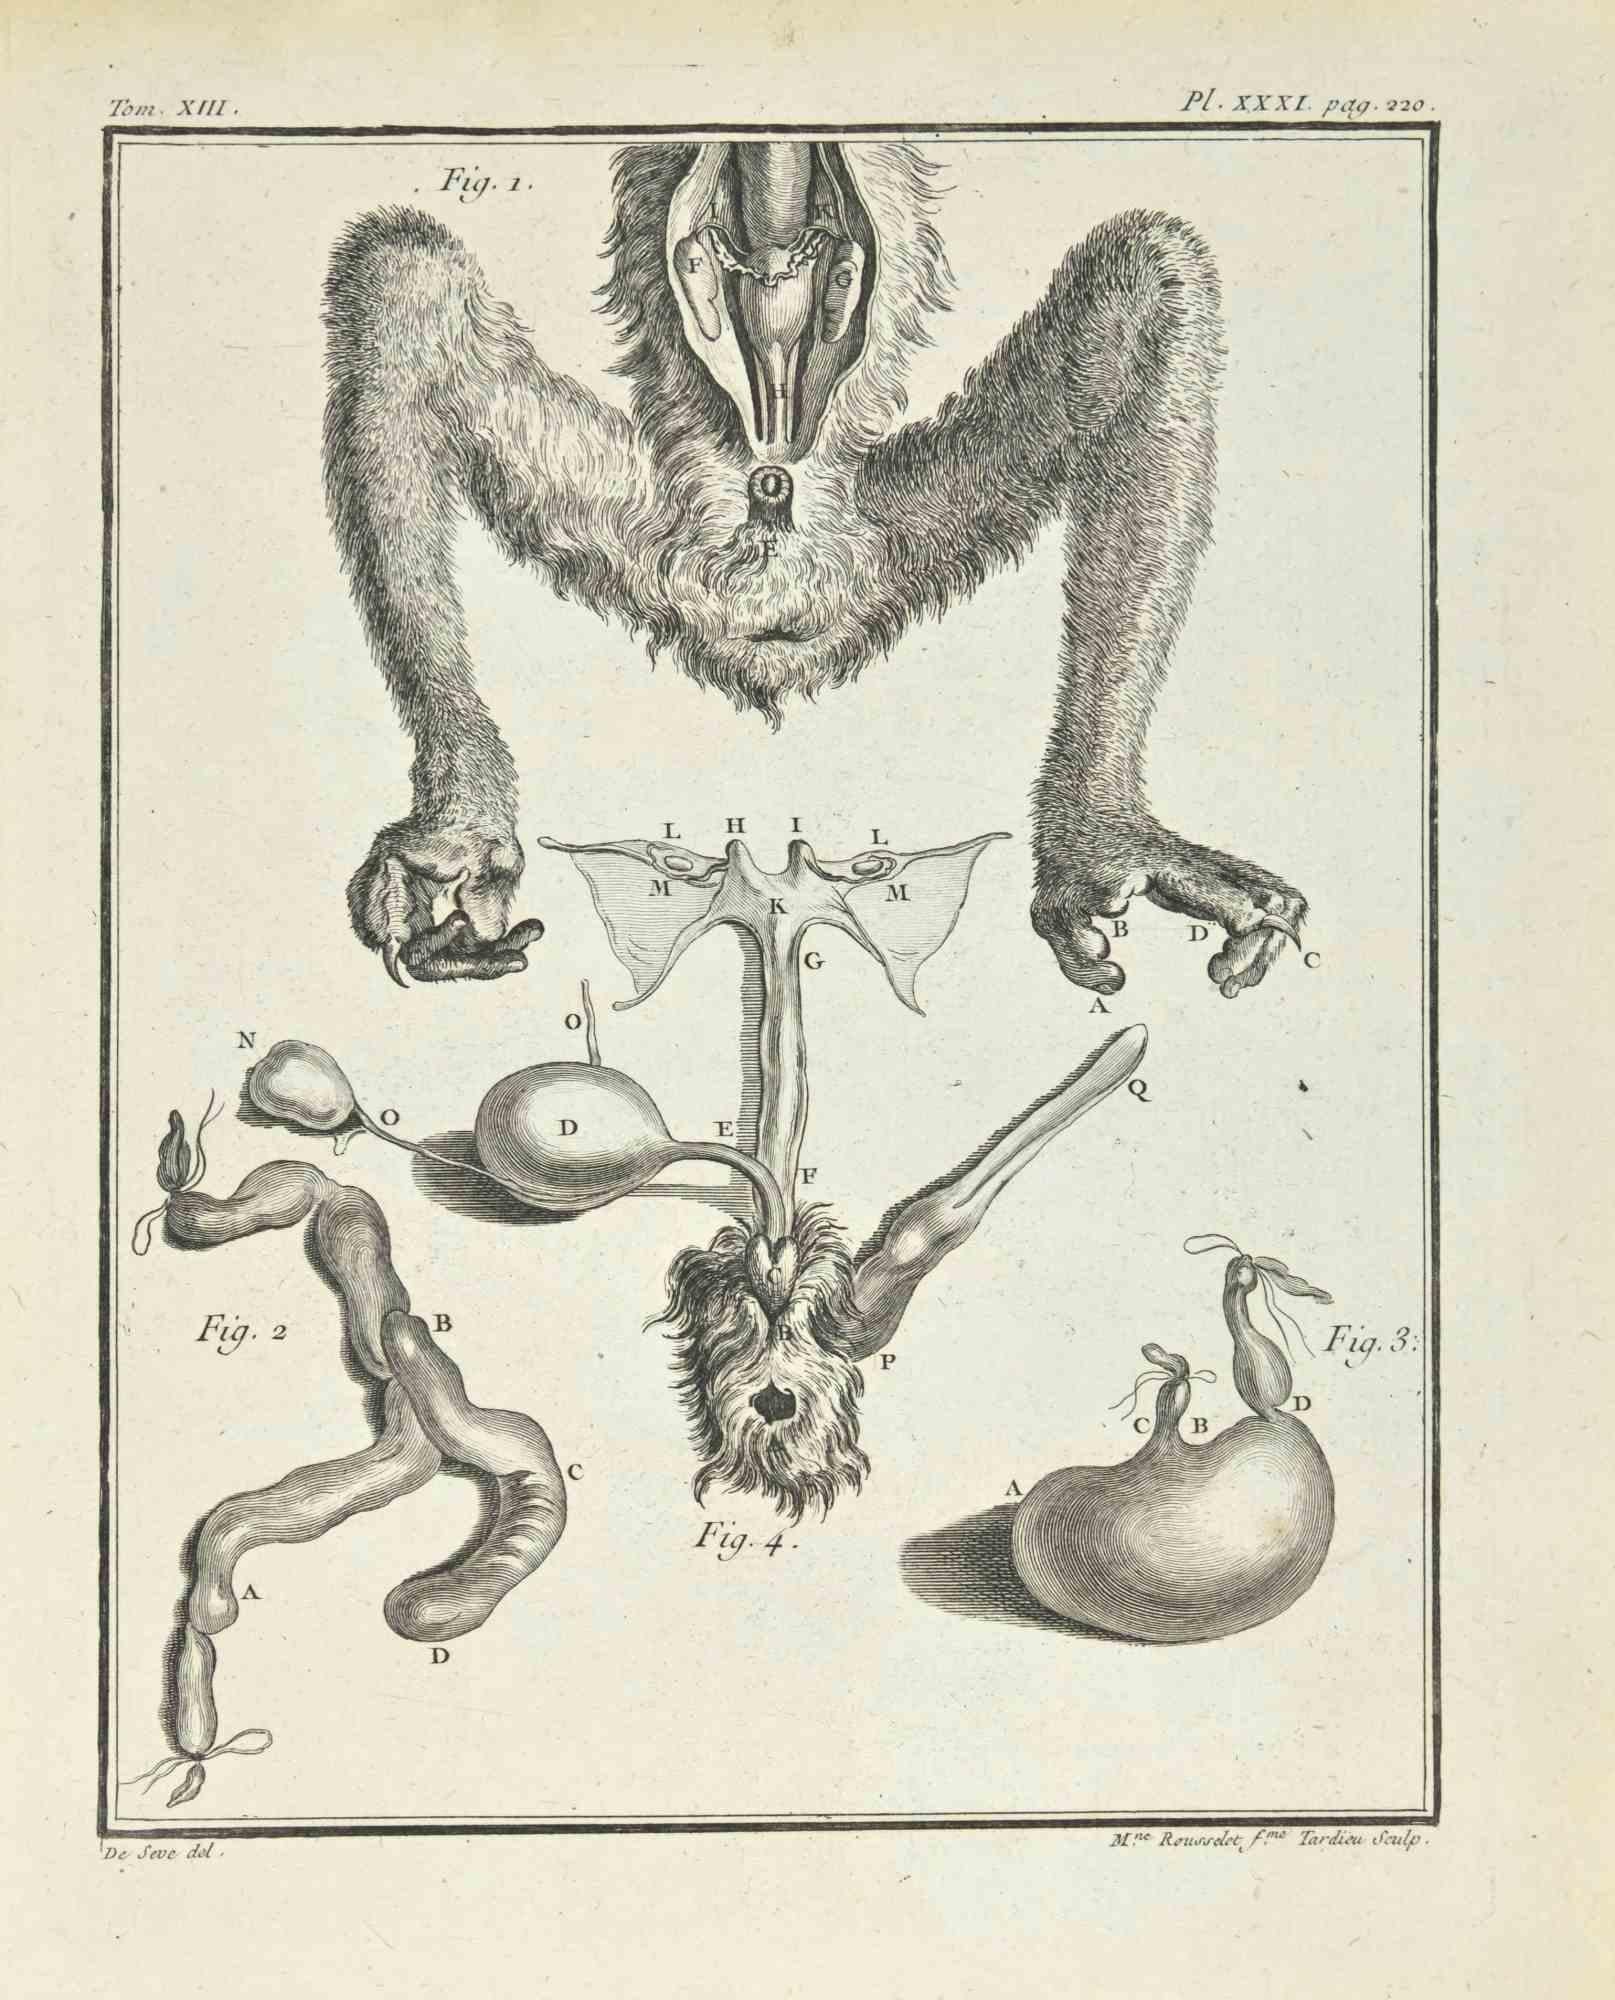 Anatomy of a Monkey is an etching realized by Juste Madeline Rousselet in 1771.

It belongs to the suite "Histoire Naturelle de Buffon".

The Artist's signature is engraved lower right.

Good conditions